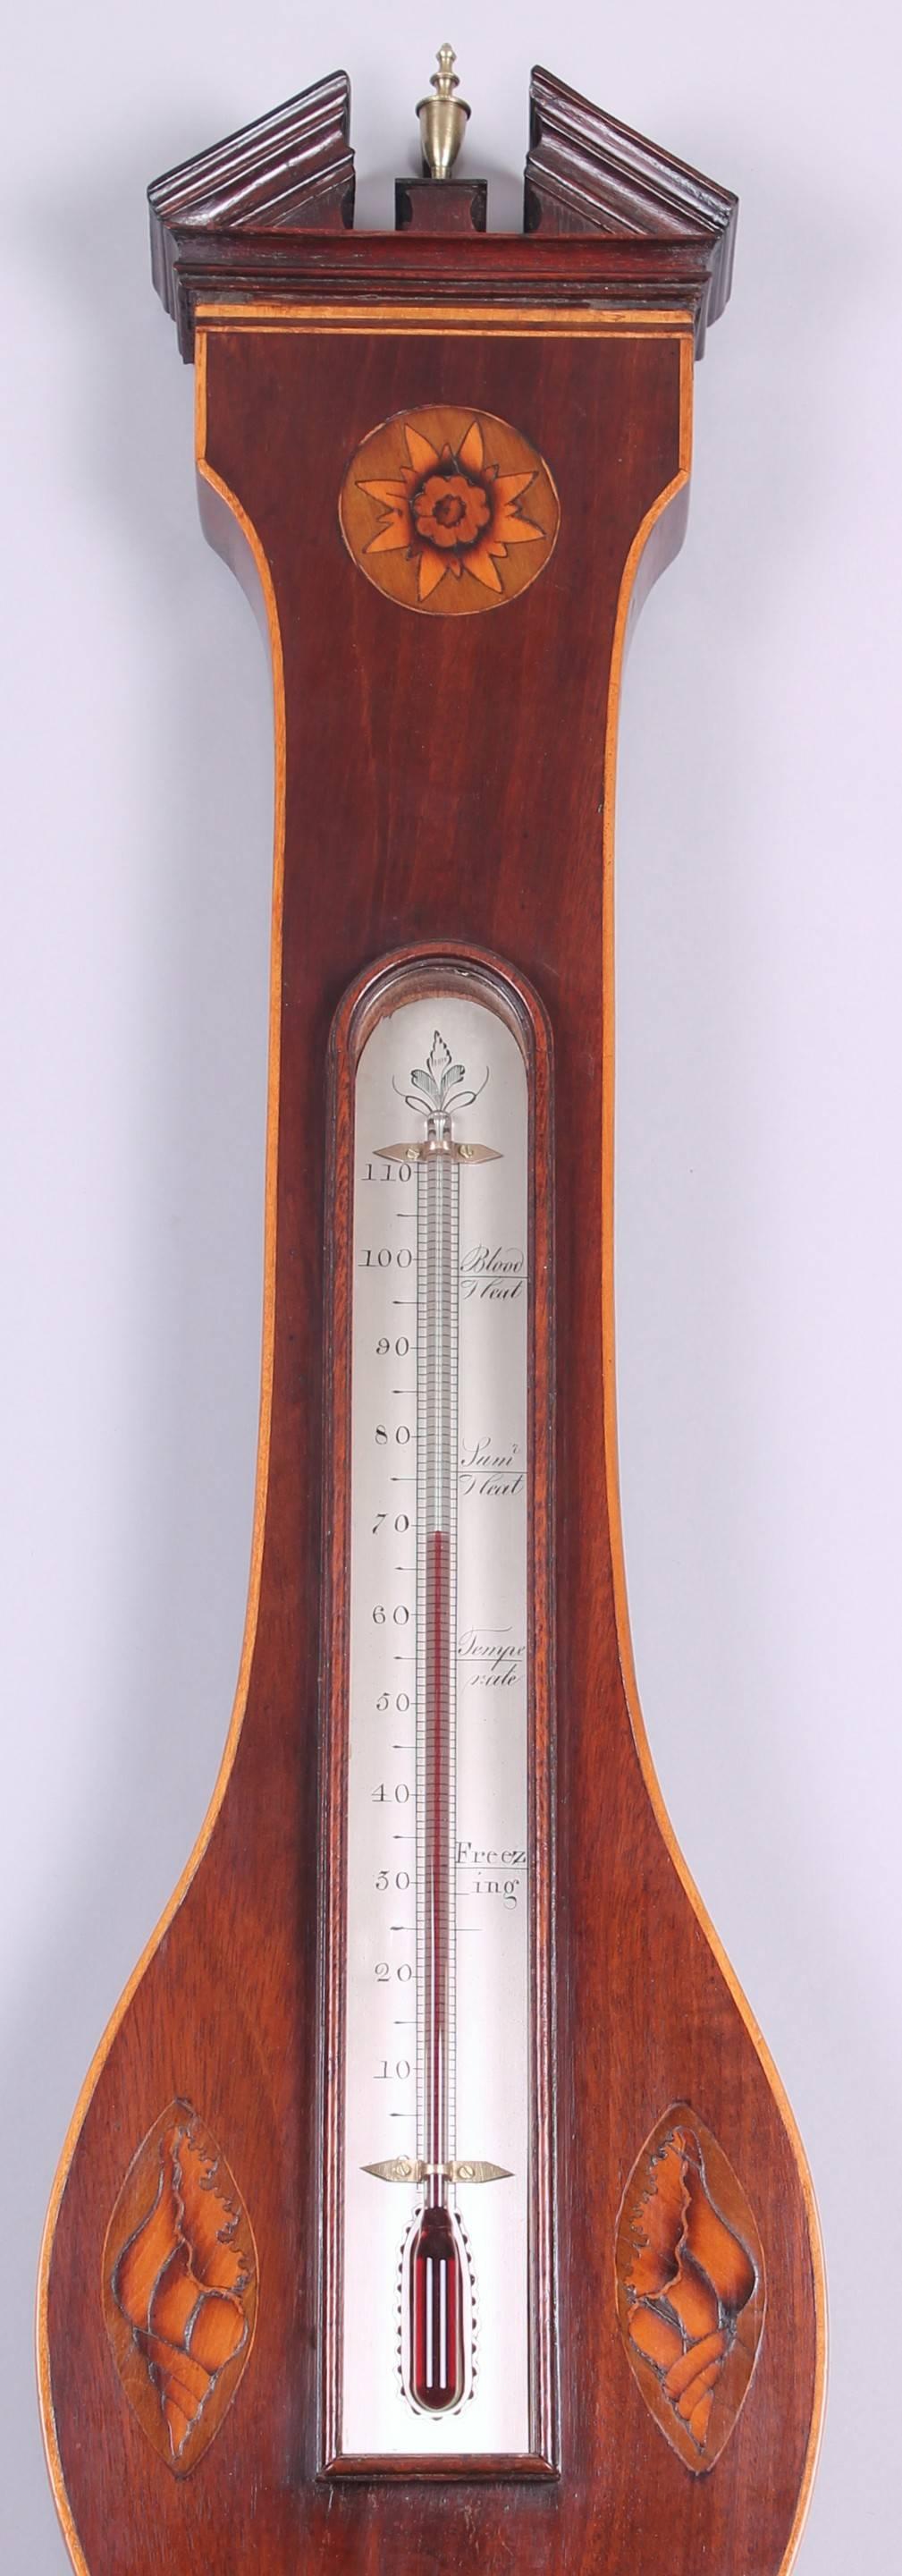 Early nineteenth century mahogany wheel barometer by F Salteri & Co, Nottingham. The case decorated in the Sheraton style with inlaid paterae and stylised sea-shells. 
Salteri & Co are known to have been working in Nottingham from 1810 to 1835